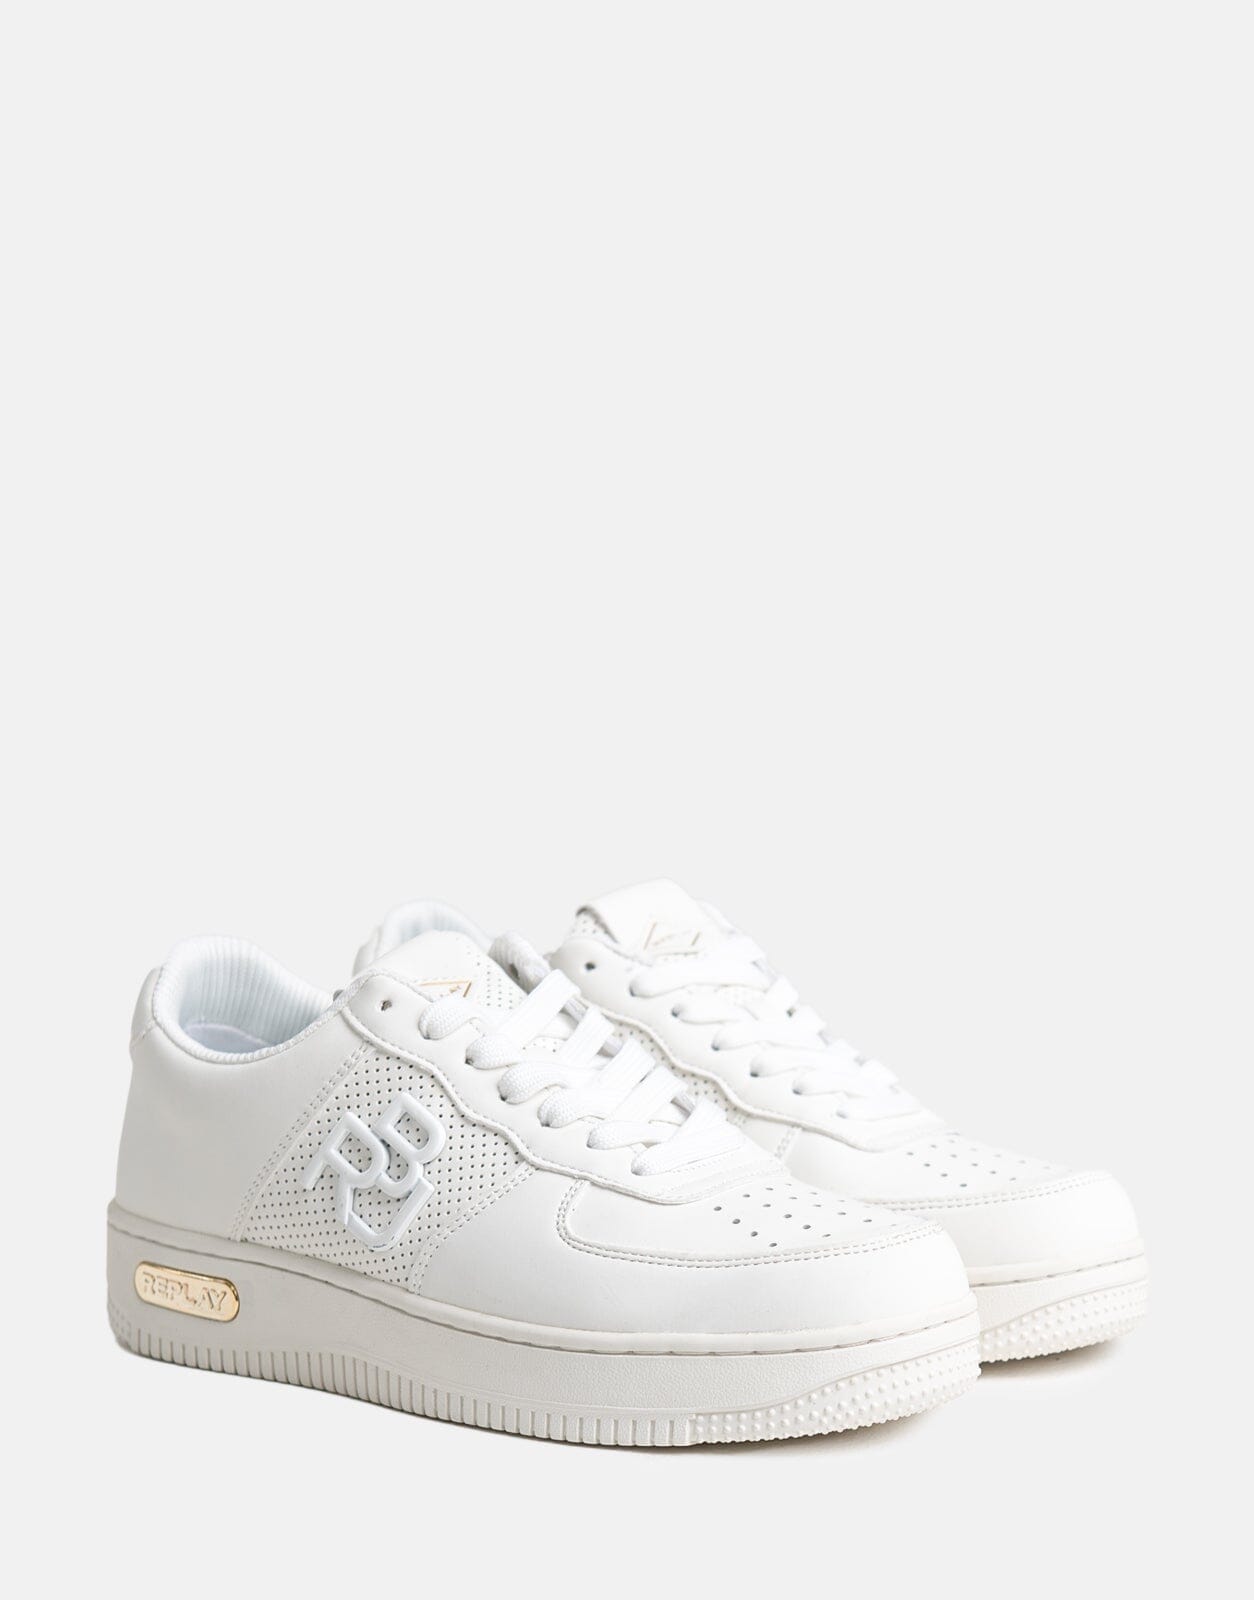 Replay Epic RPJ Off White Sneakers Replay